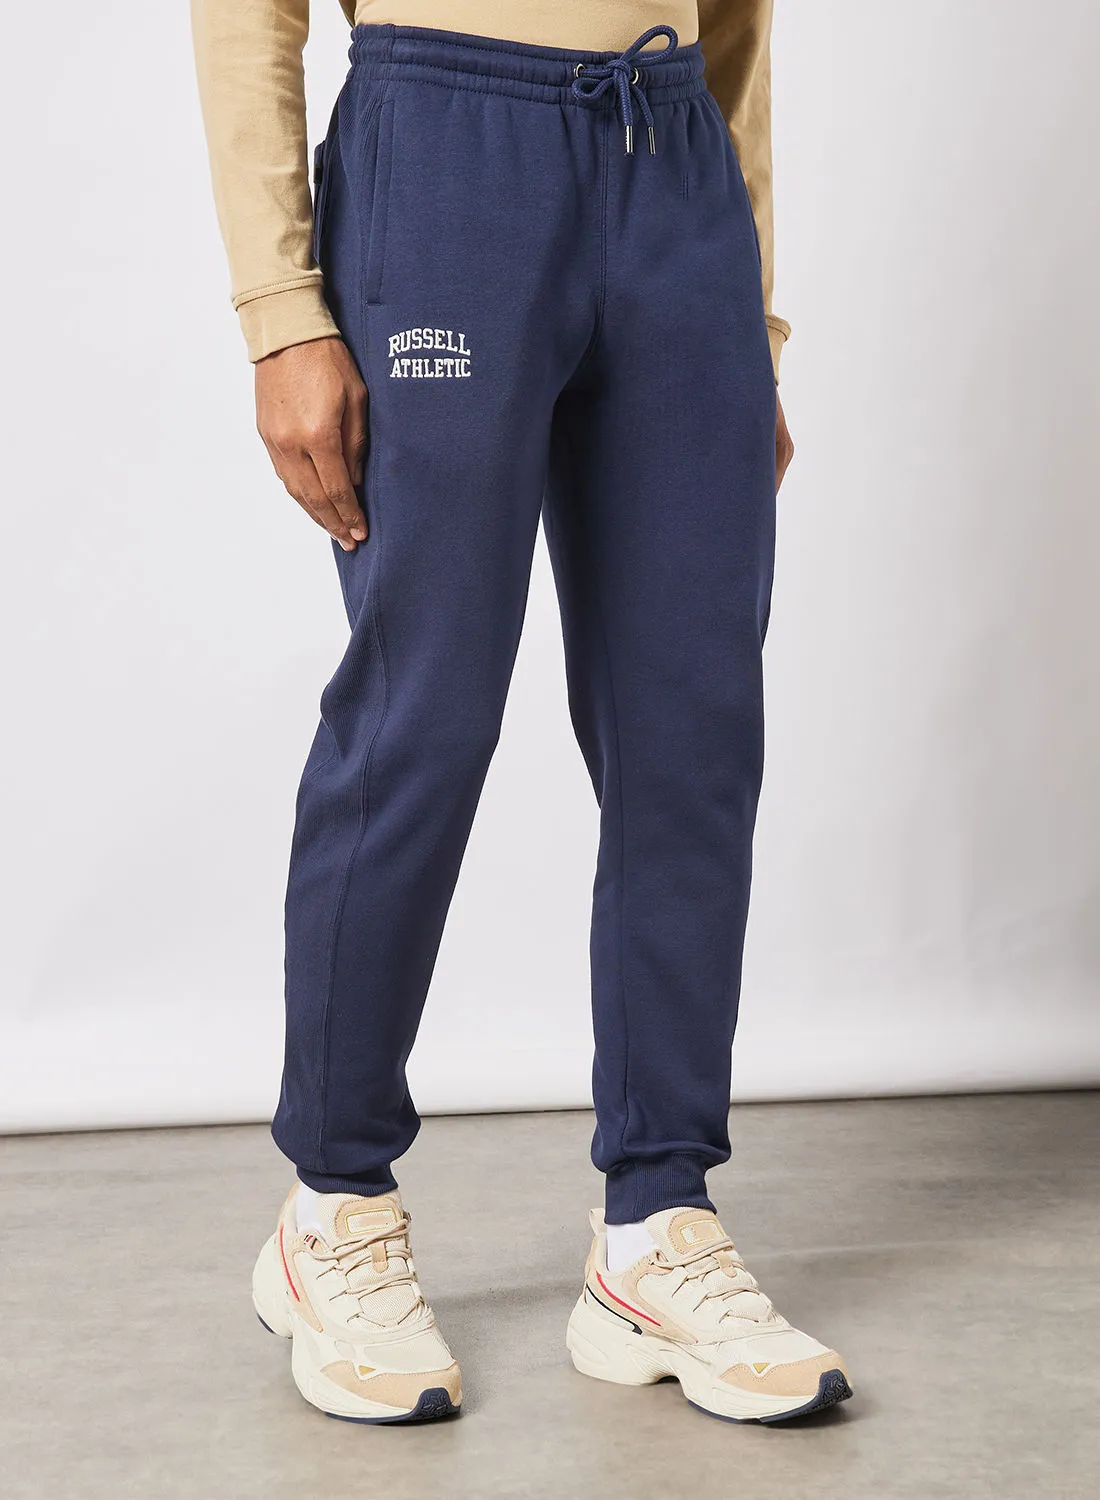 Russell Athletic Iconic Cuffed Sweatpants Navy